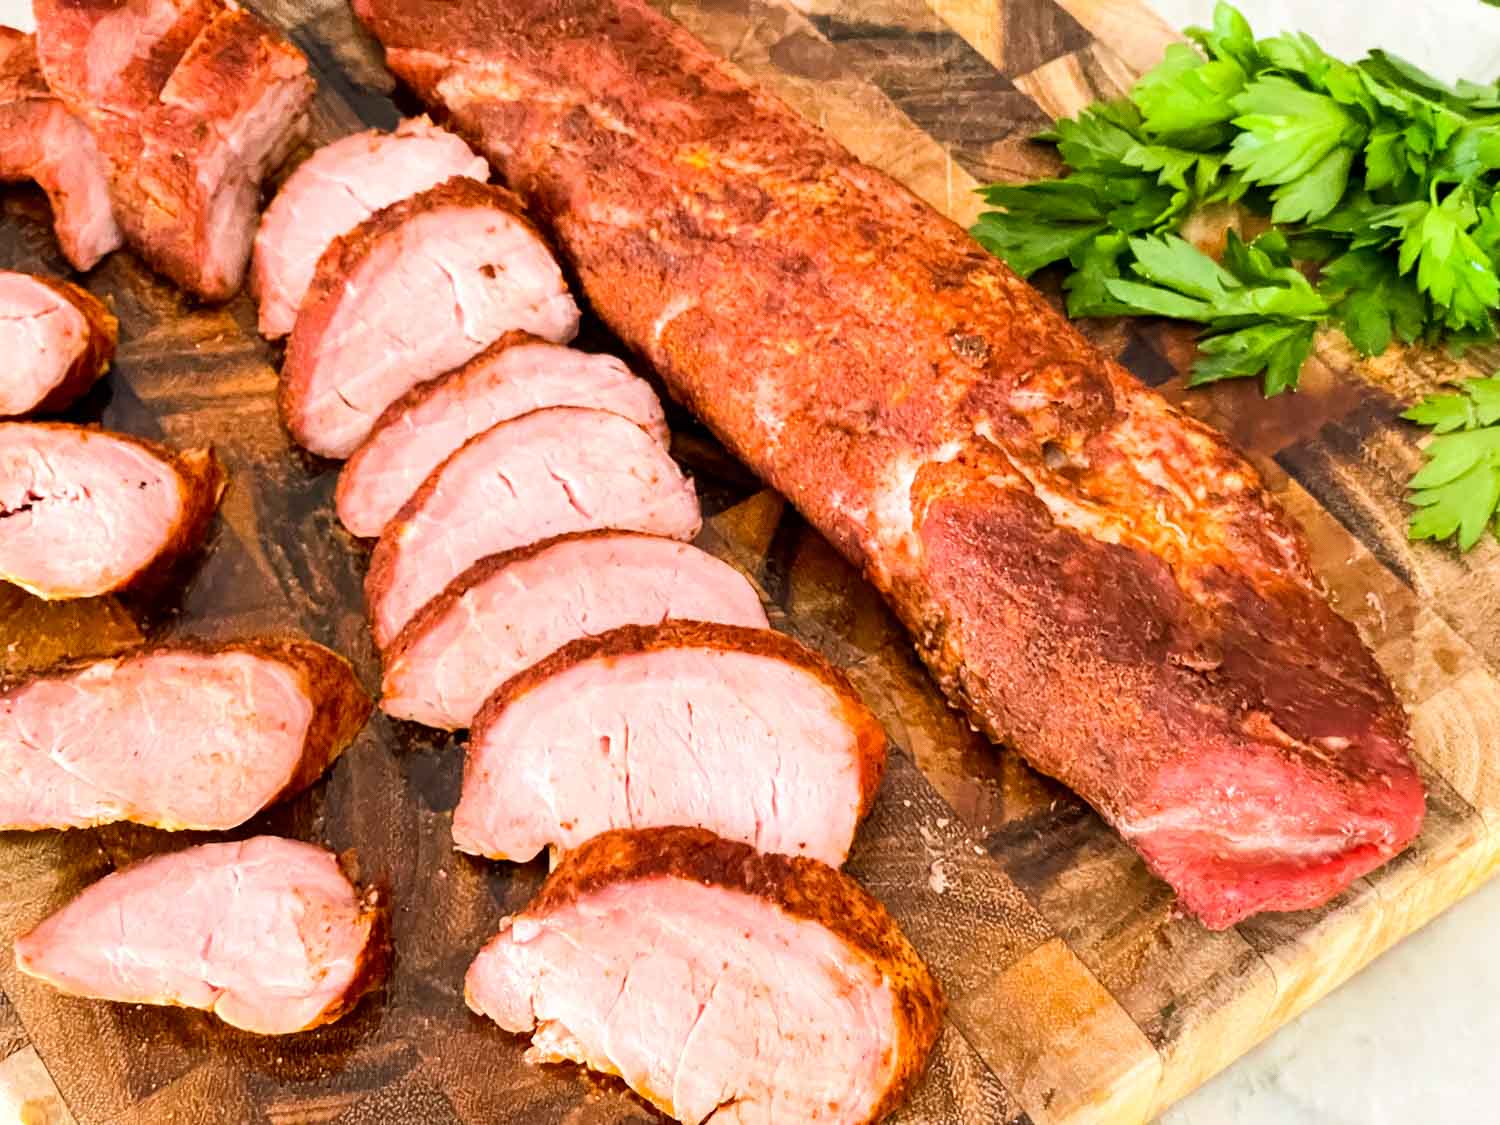 Smoked Pork Tenderloin, one whole and one sliced, on a wood cutting board